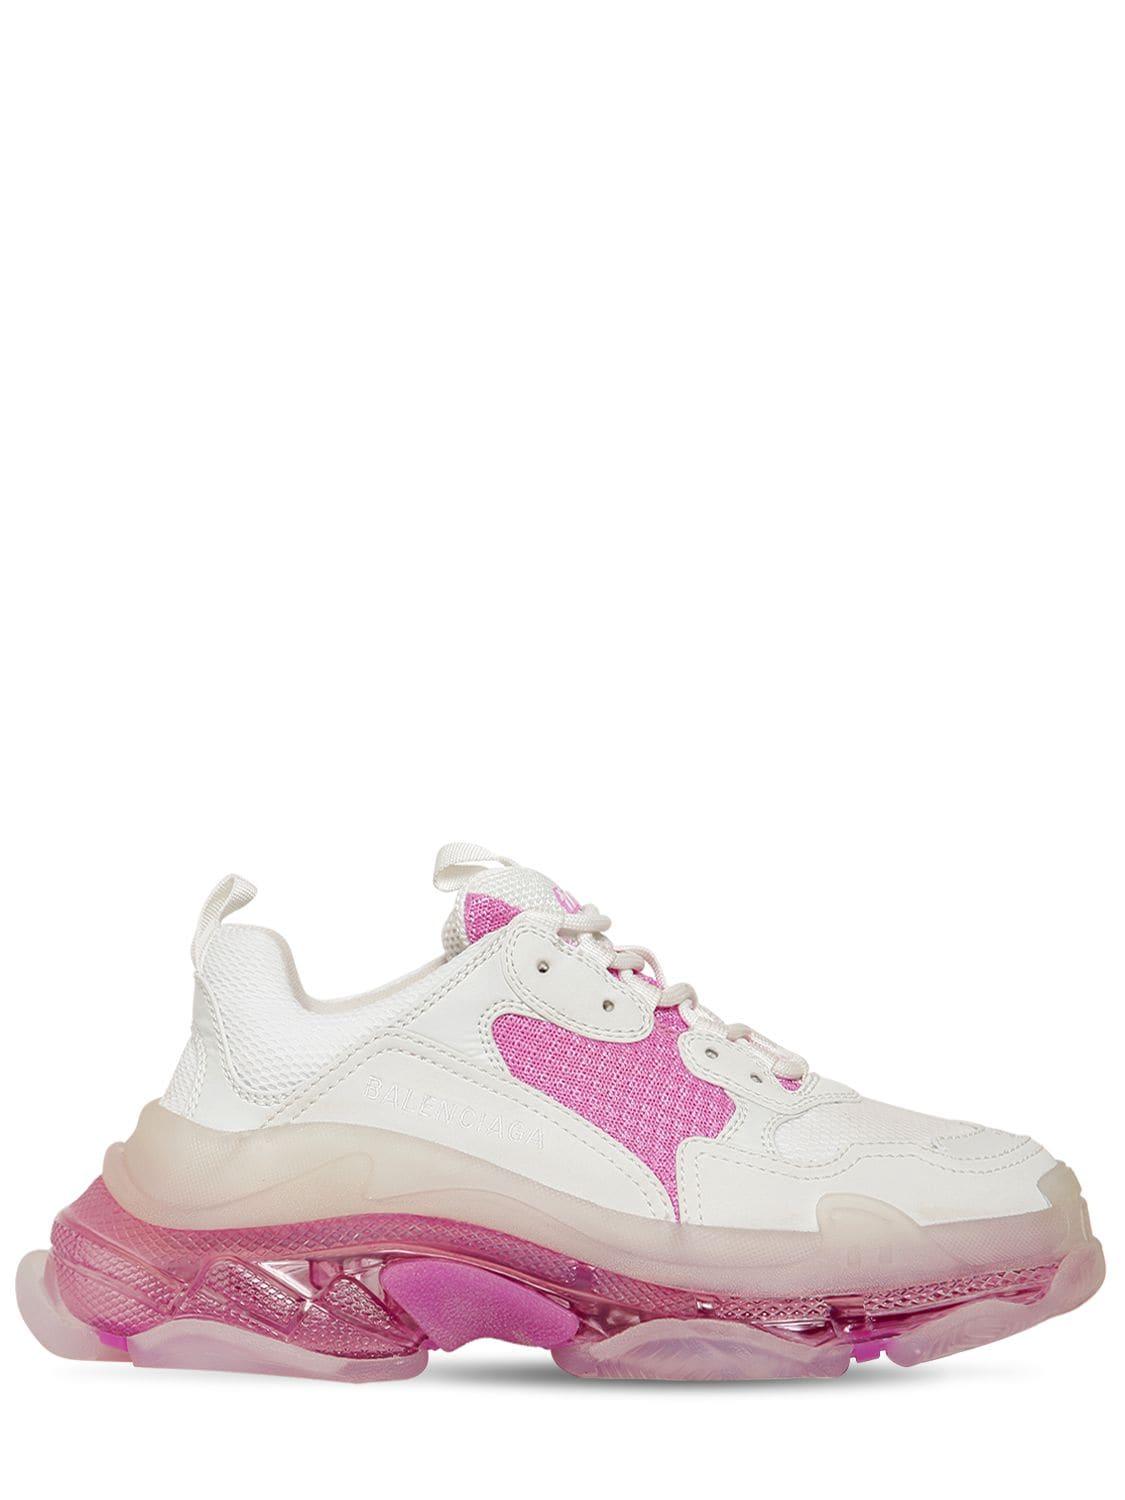 Balenciaga Leather Triple S Clear Sole Sneaker in White Pink (Pink) | Lyst